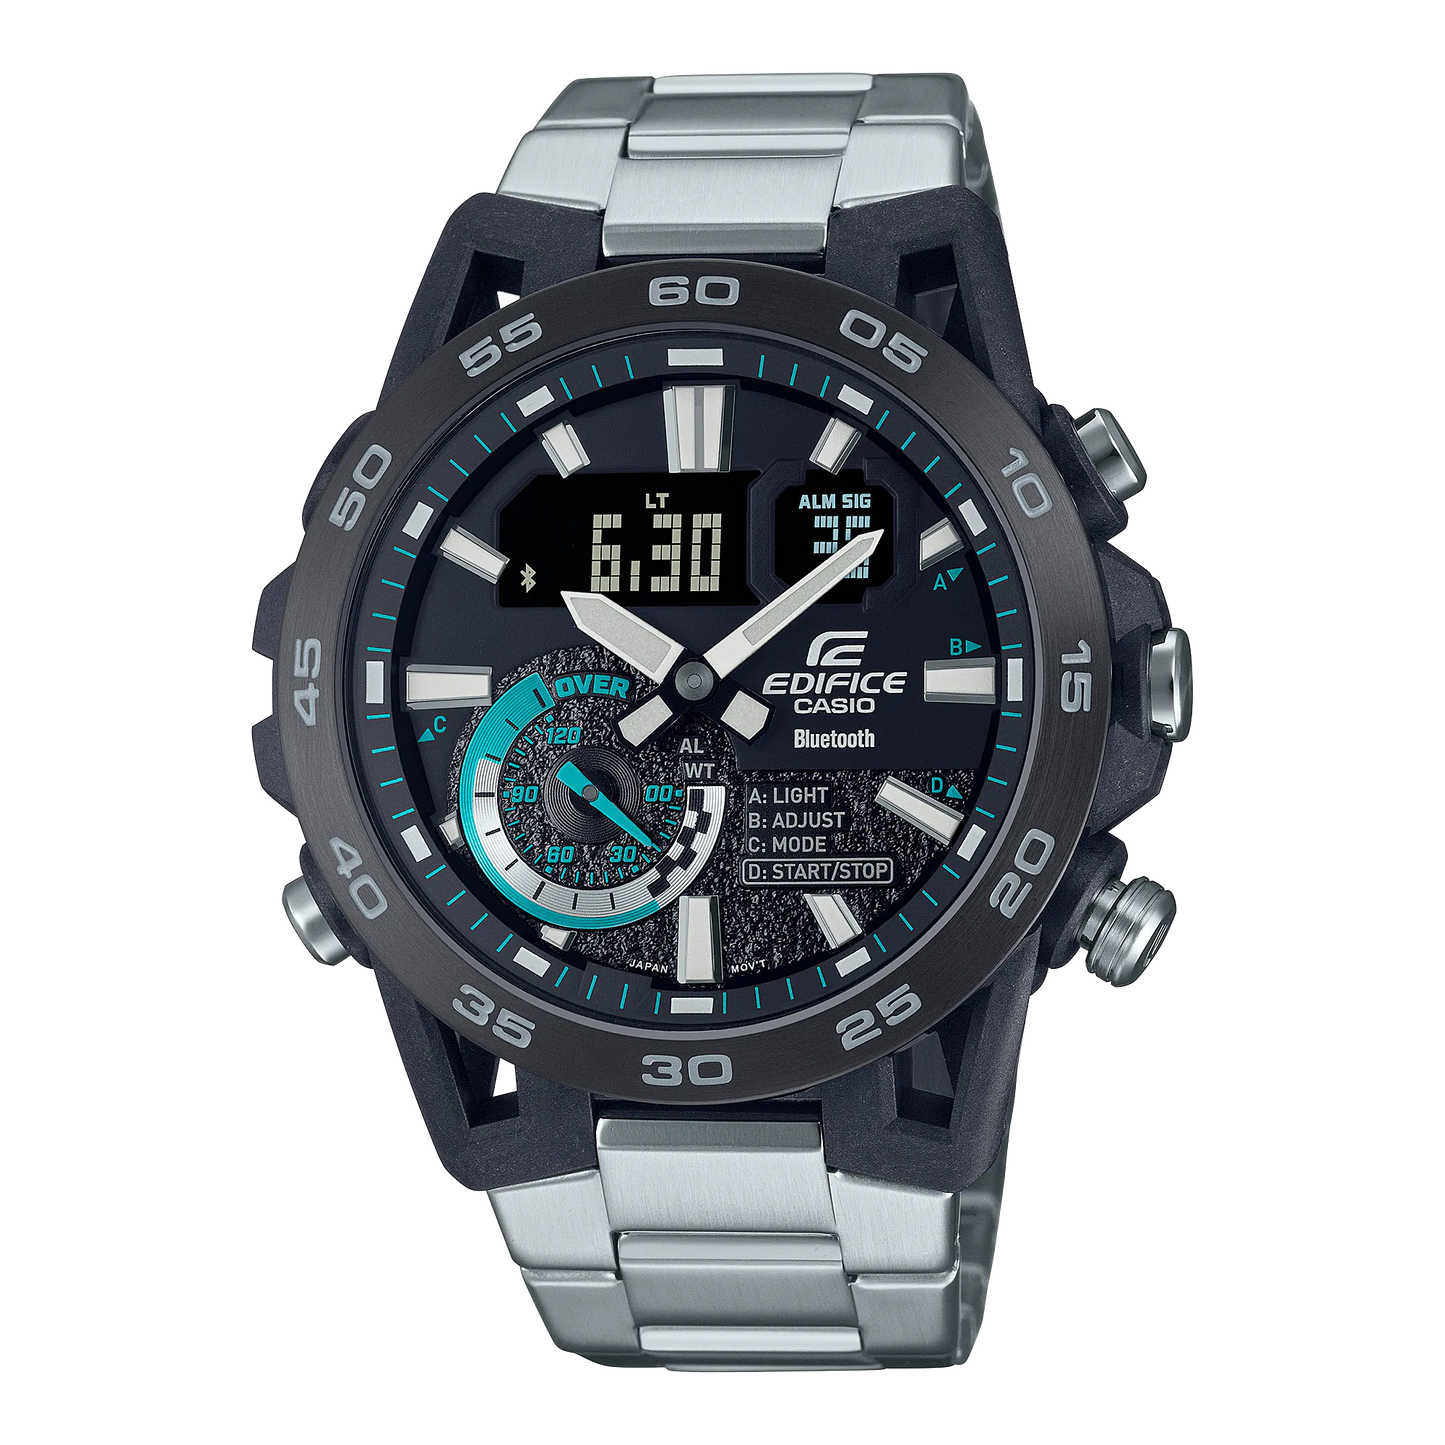 EDIFICE SOSPENSIONE ECB-40, with carbon fiber reinforced resin suspension arm design and Smartphone Link.